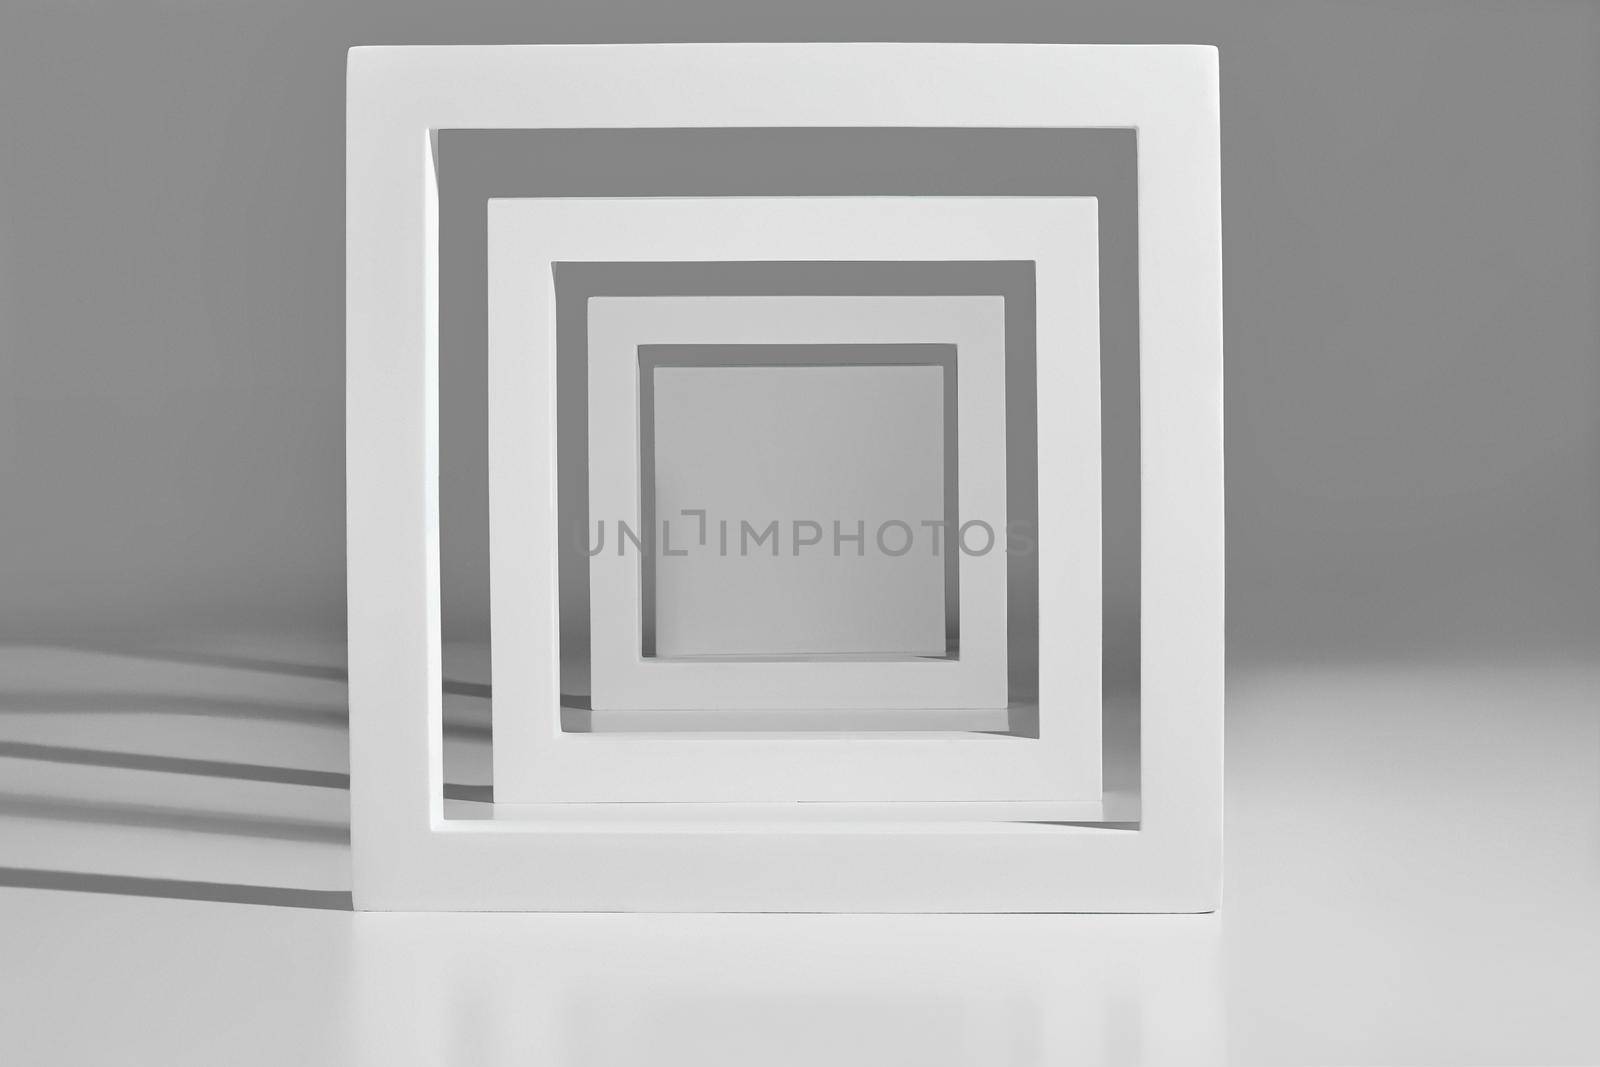 Showcase layout of square frames of different sizes on gray background by nazarovsergey